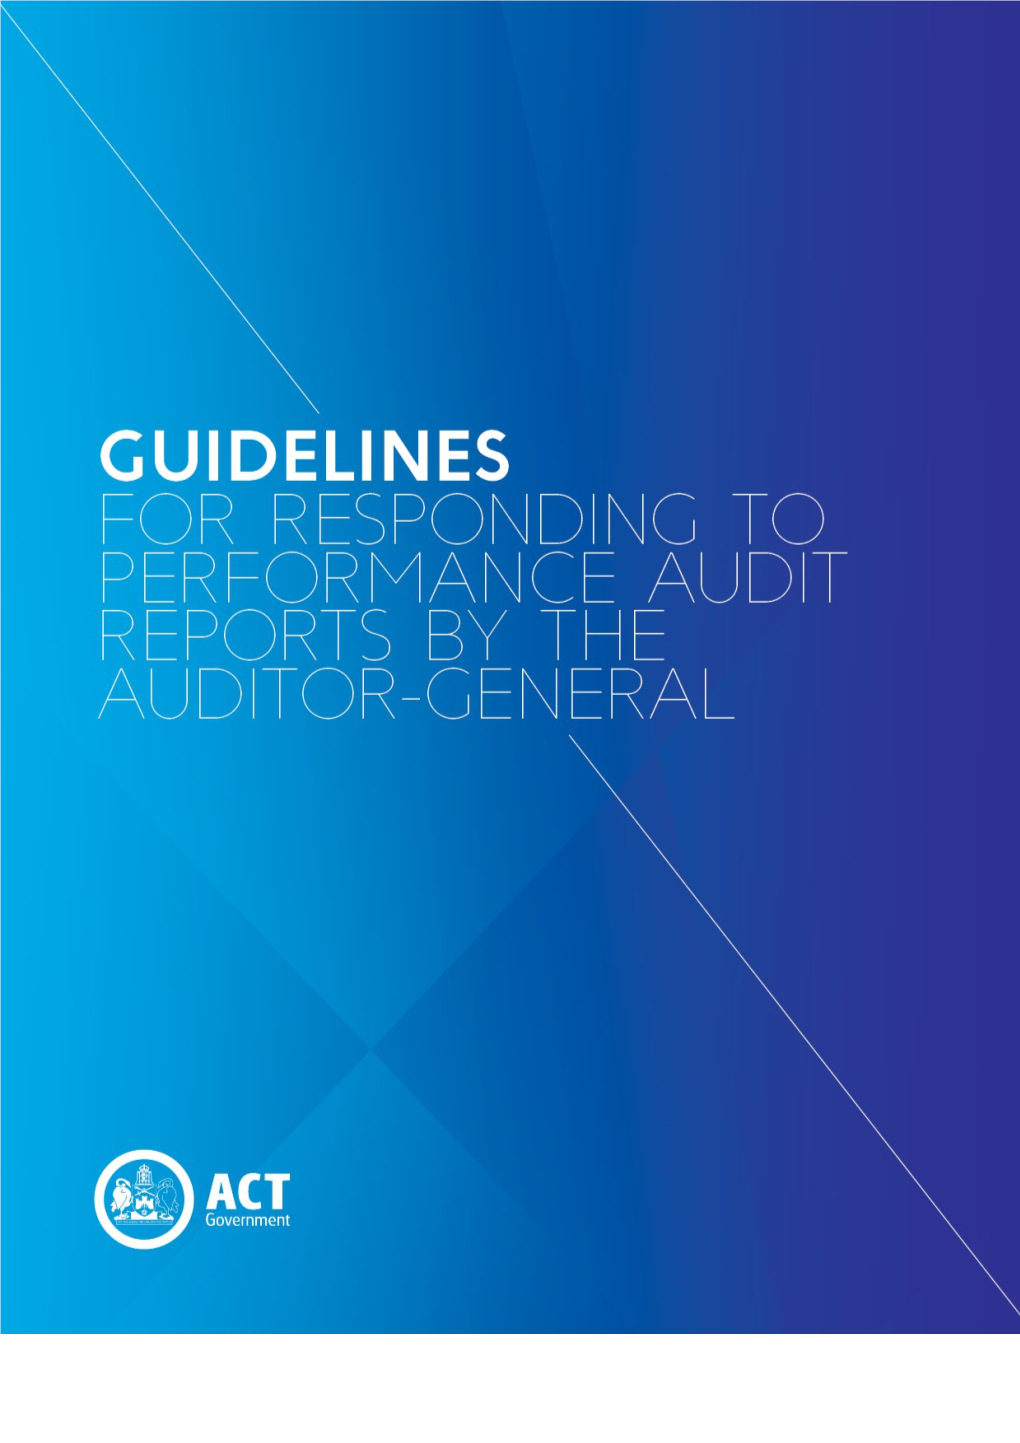 Guidelines for Responding to Performance Audit Reports by the Auditor-General